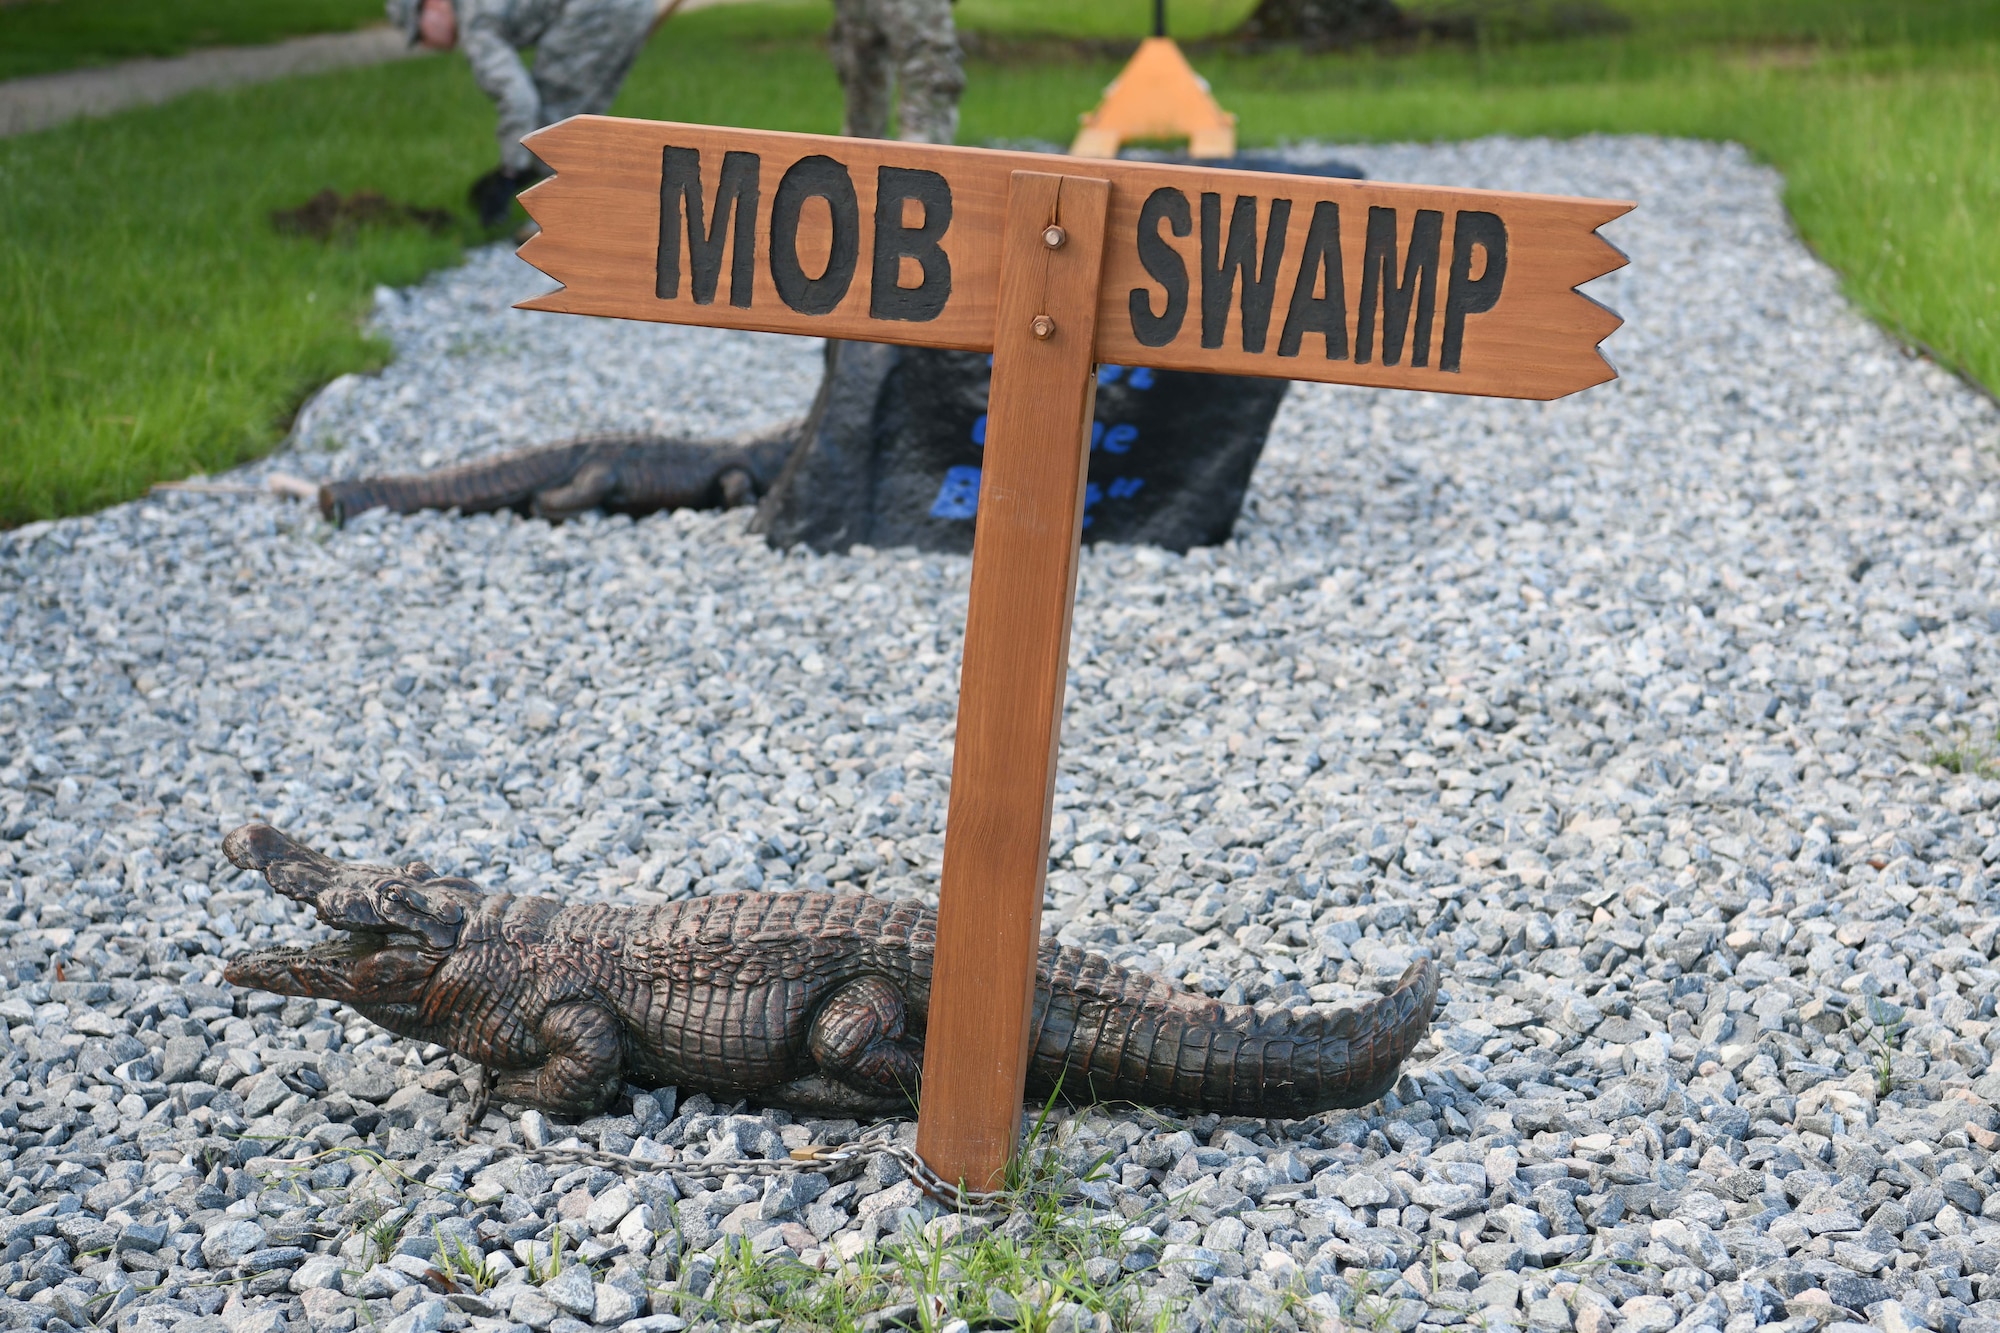 Photo shows a concrete alligator sitting by a sign that says "MOB SWAMP."